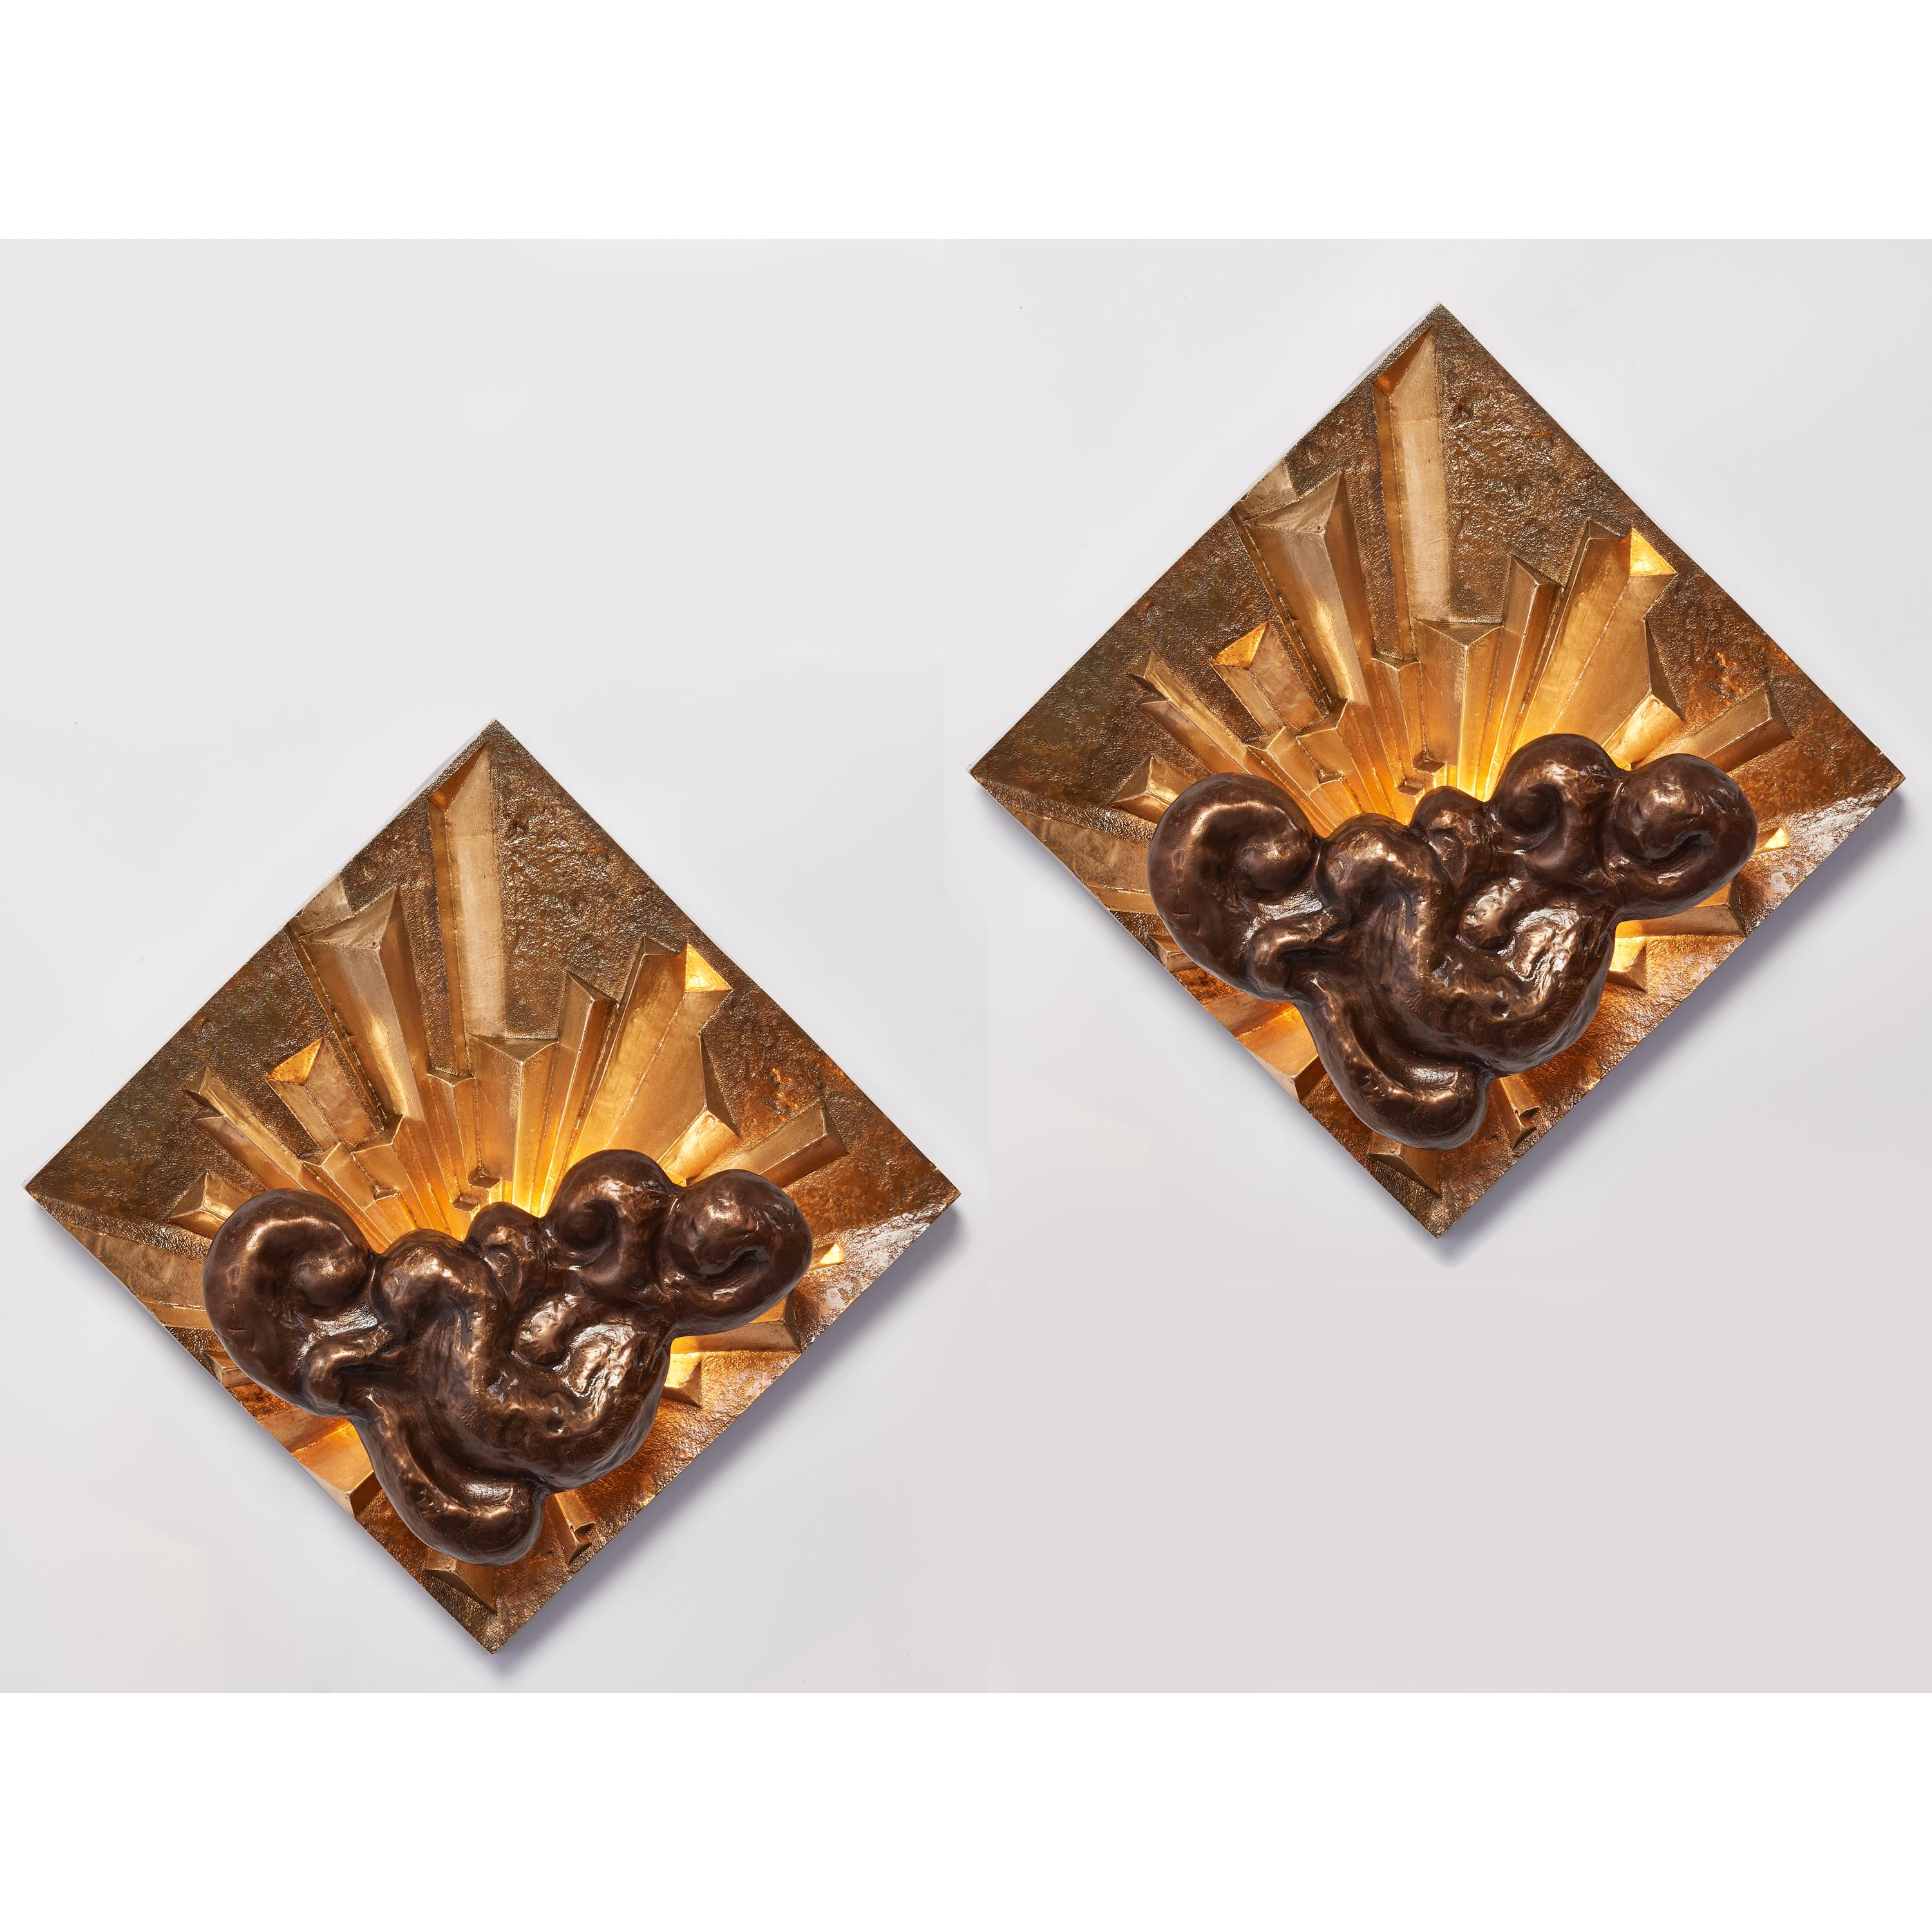 FRANCE, 1970's
A stunning and rare pair of beautifully sculpted cast bronze sconces in haut relief, with contrasting burnished, chiseled, and oxidized surfaces with bolts of light bursting from behind turbulent clouds.
18 W x 18 H x 4.5 D
Rewired